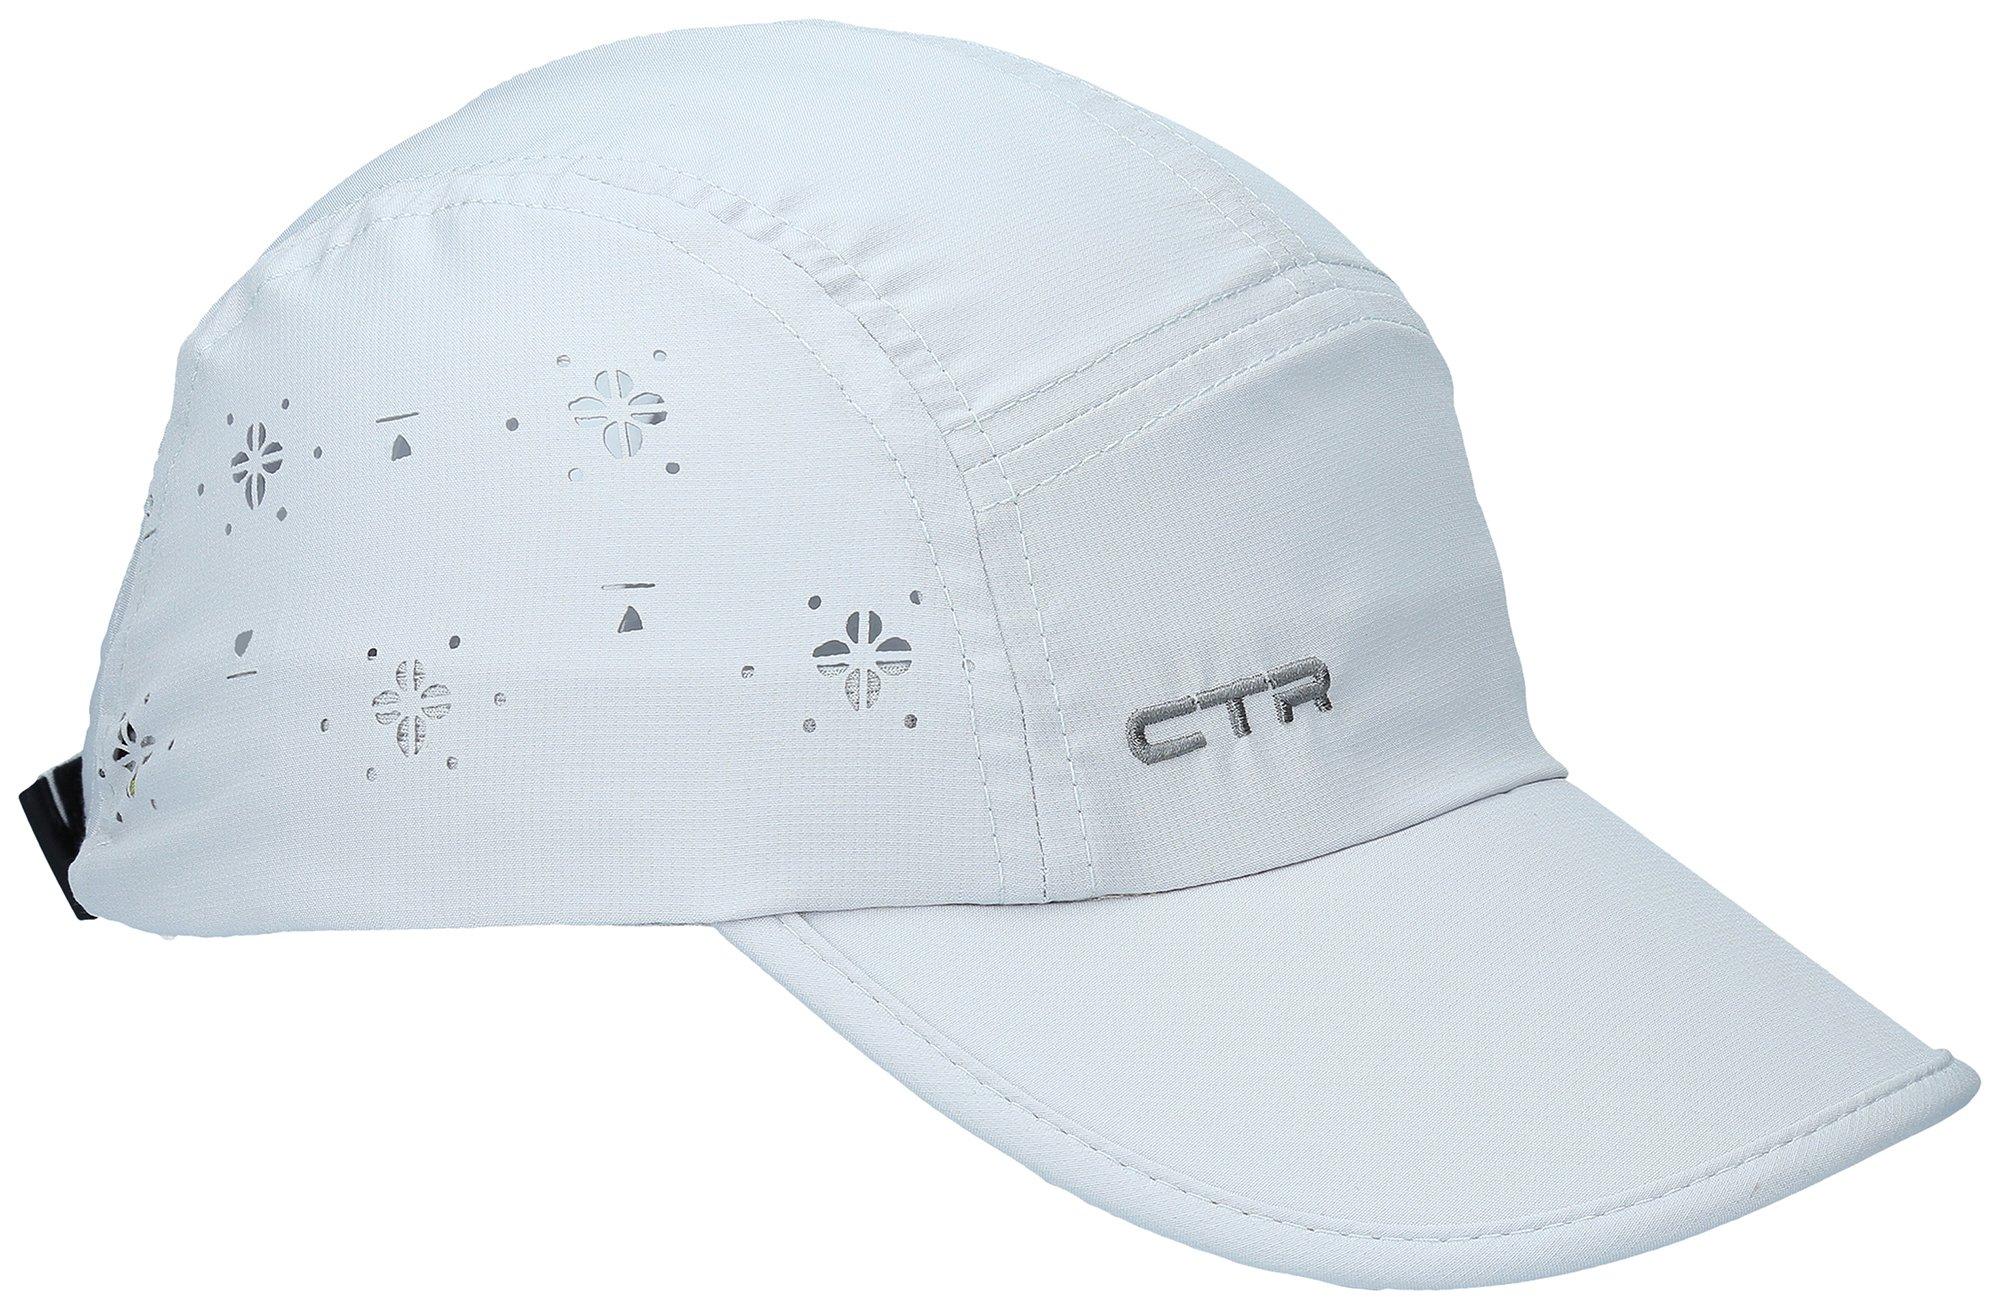 CTR Womens Summit Vented Hat